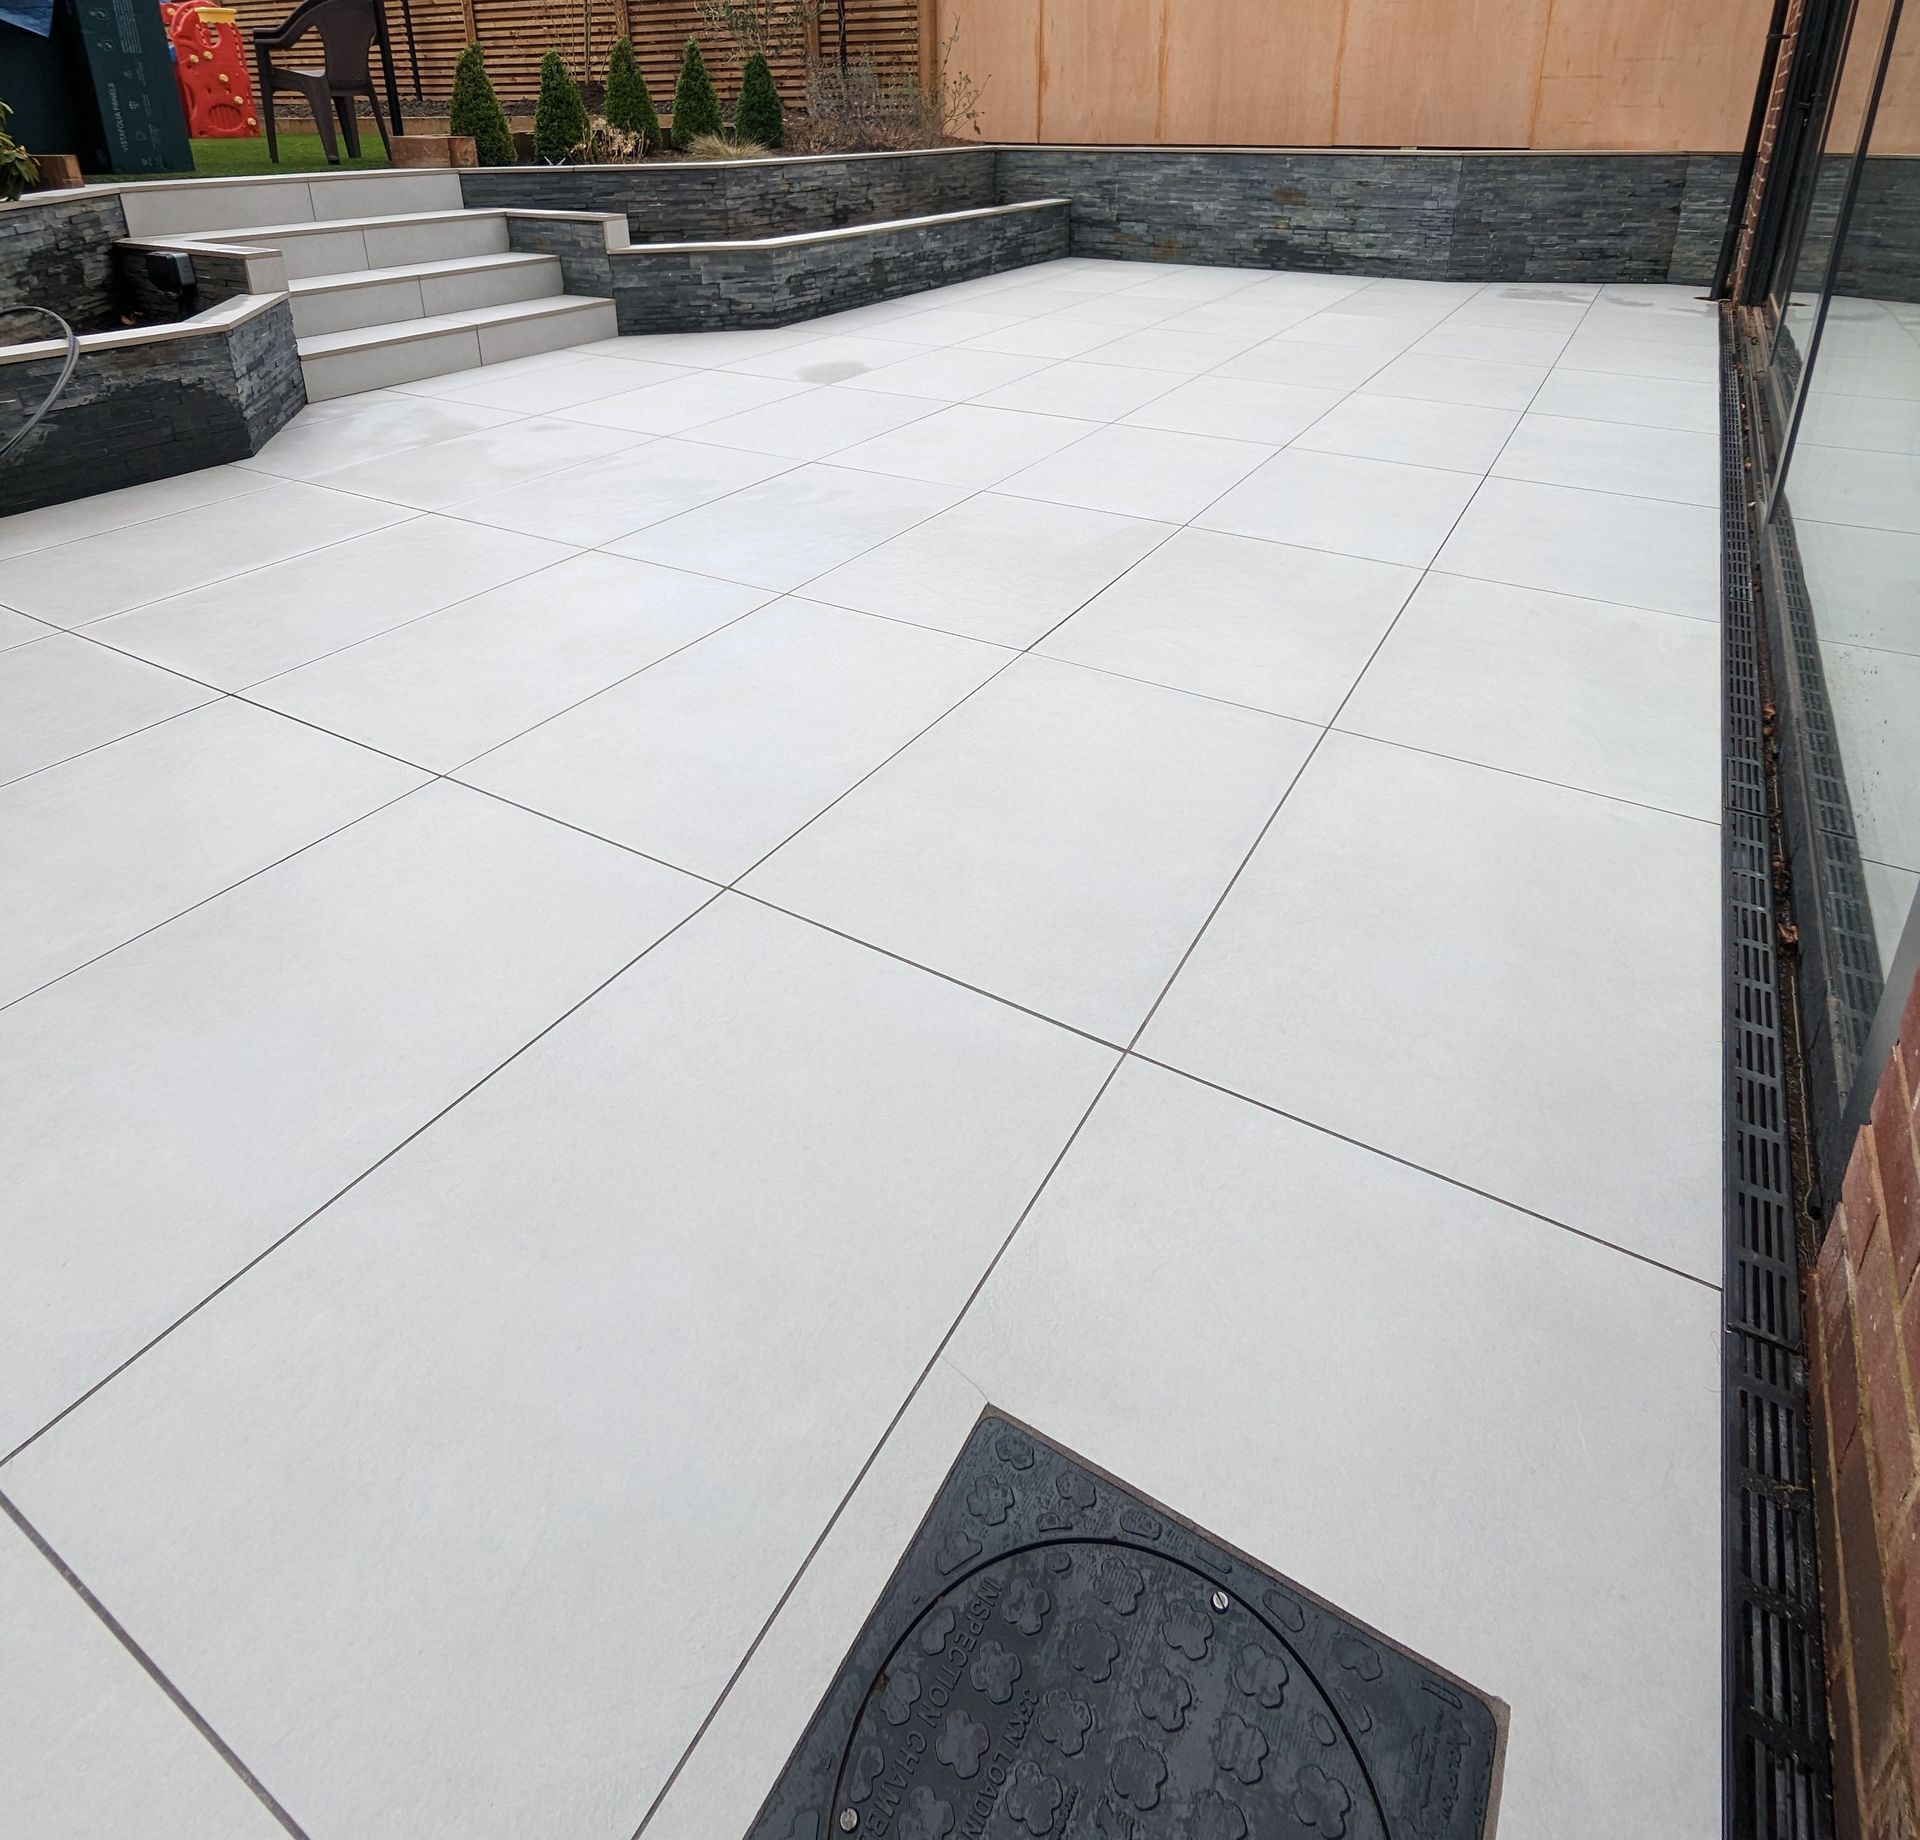 Porcelain tiled patio deep  cleaning in Manchester, including grout cleaning